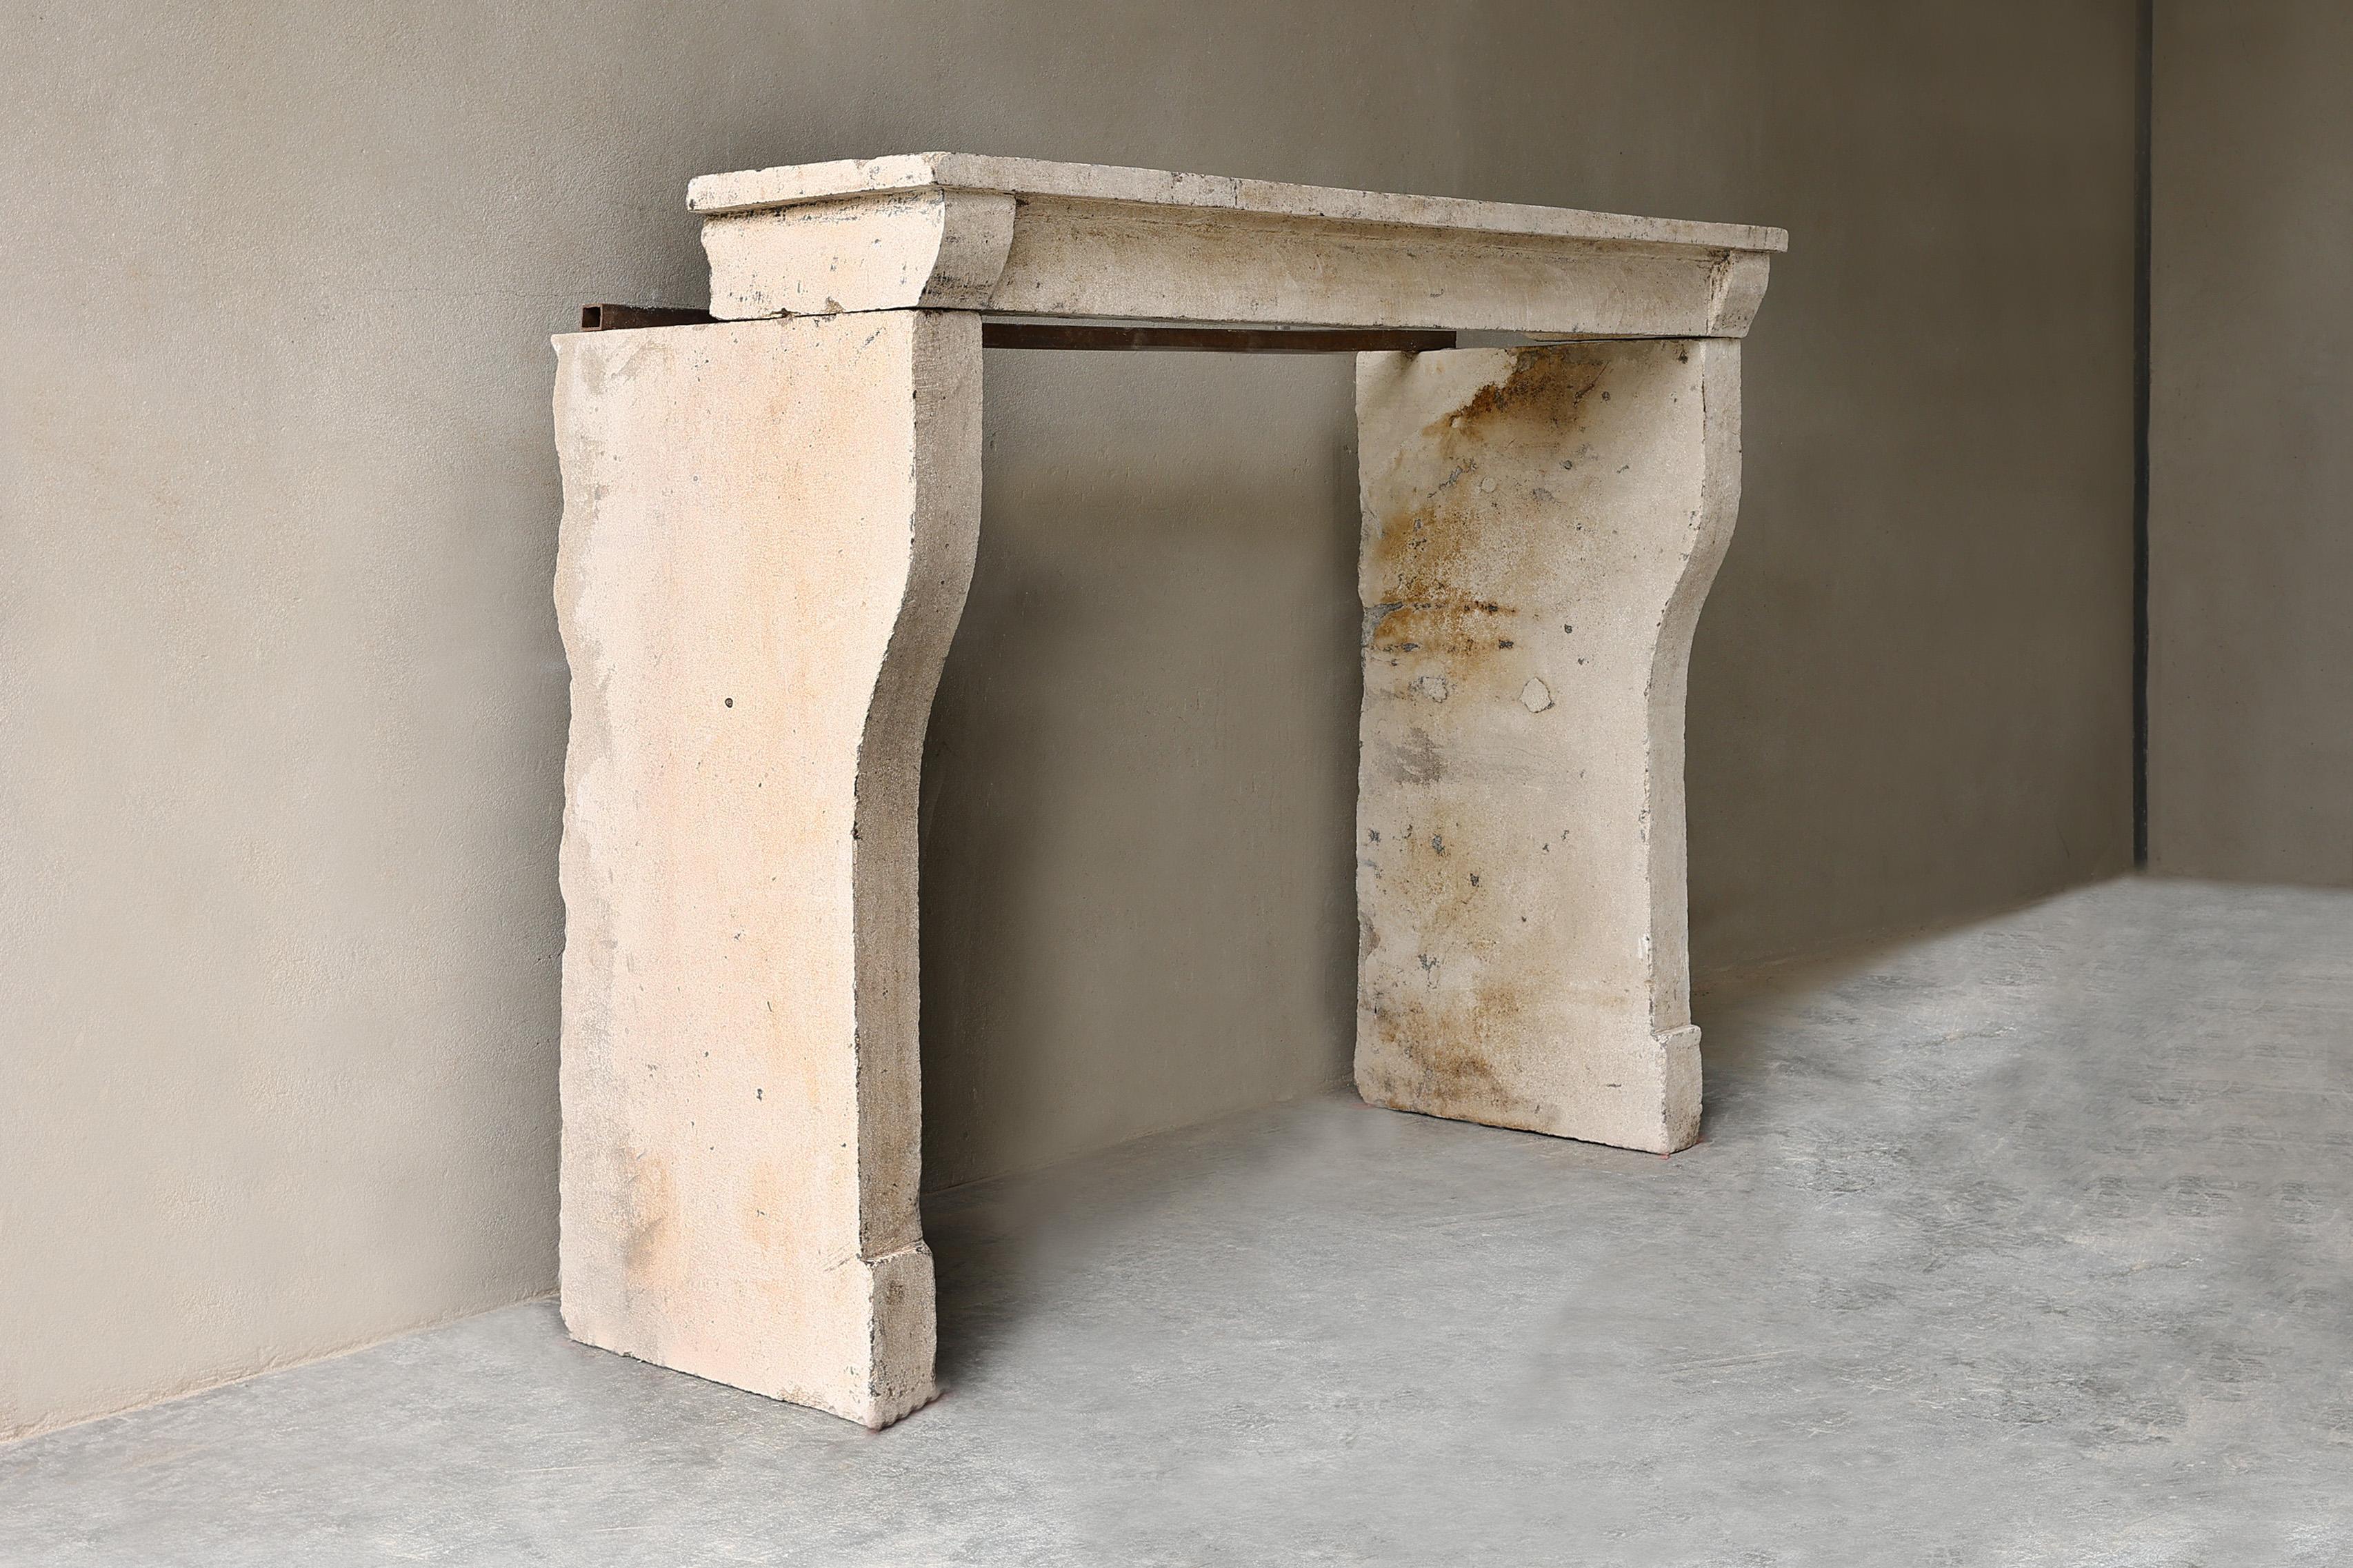 Antique compact fireplace of French limestone from the 19th century in Campagnarde style! A rustic fireplace that is compact in size and fits in many interiors. The fireplace has slightly curved legs and a slender appearance.